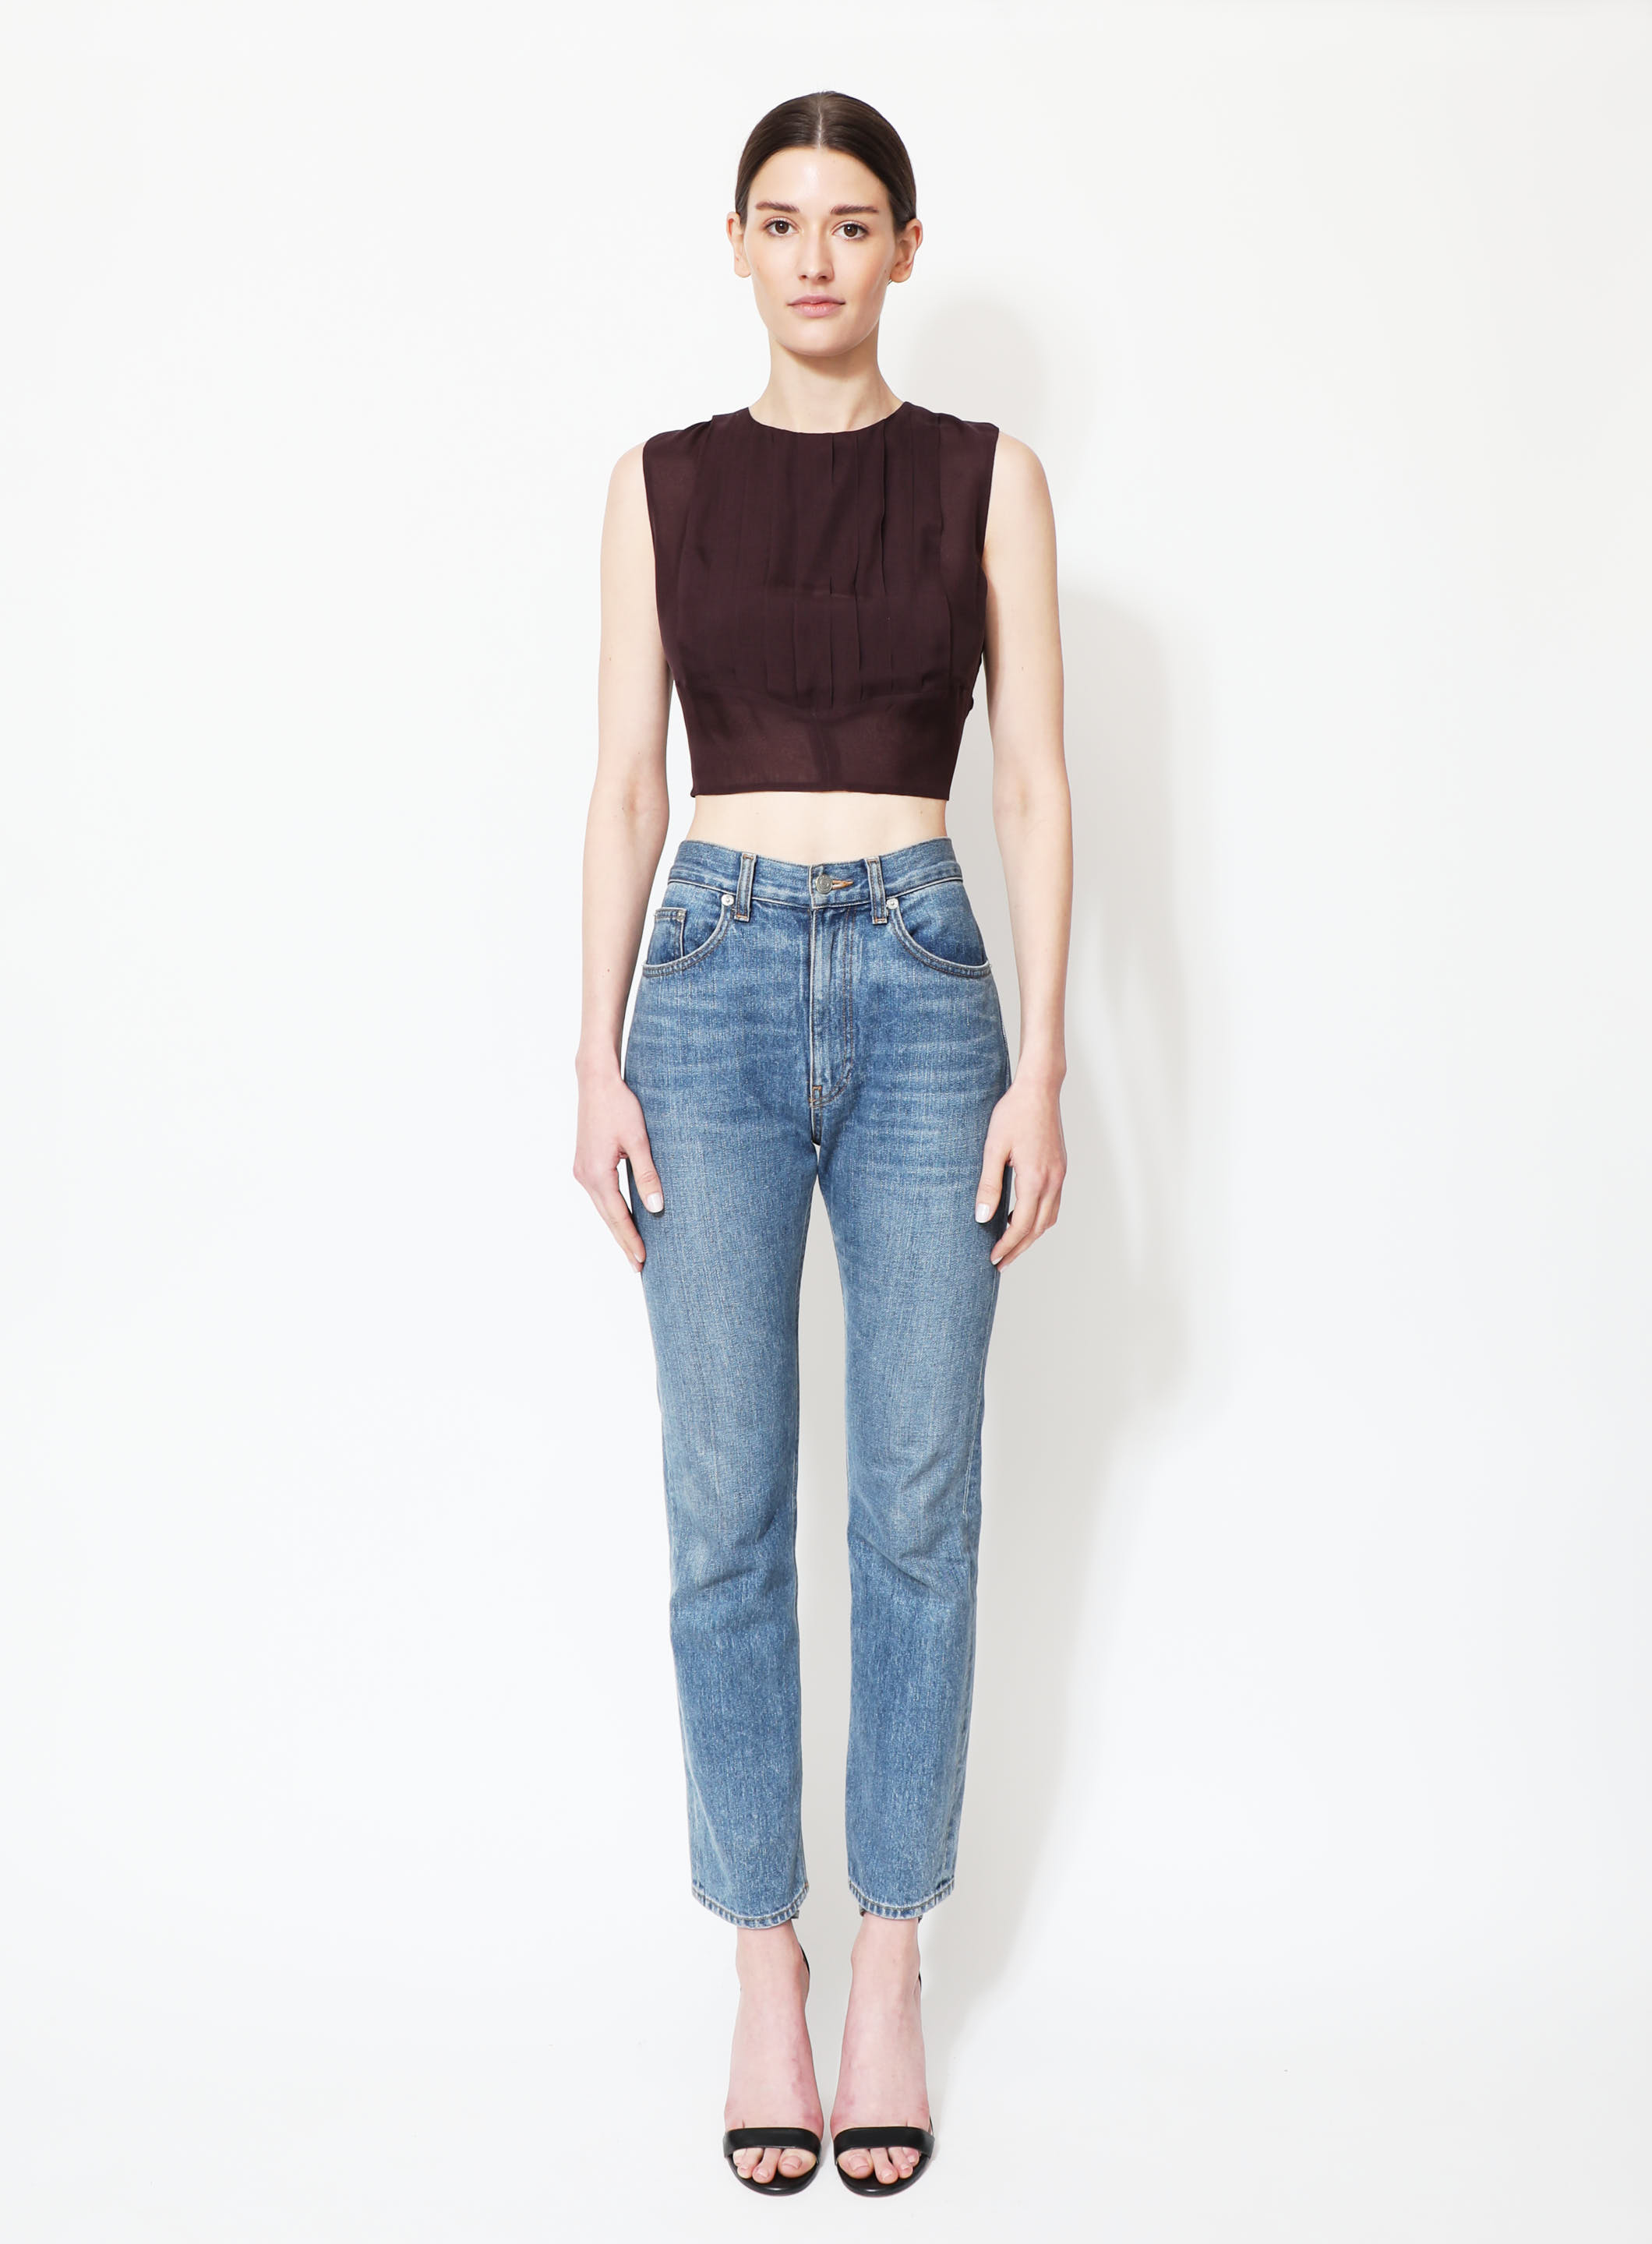 Pleated Cropped Top, Authentic & Vintage